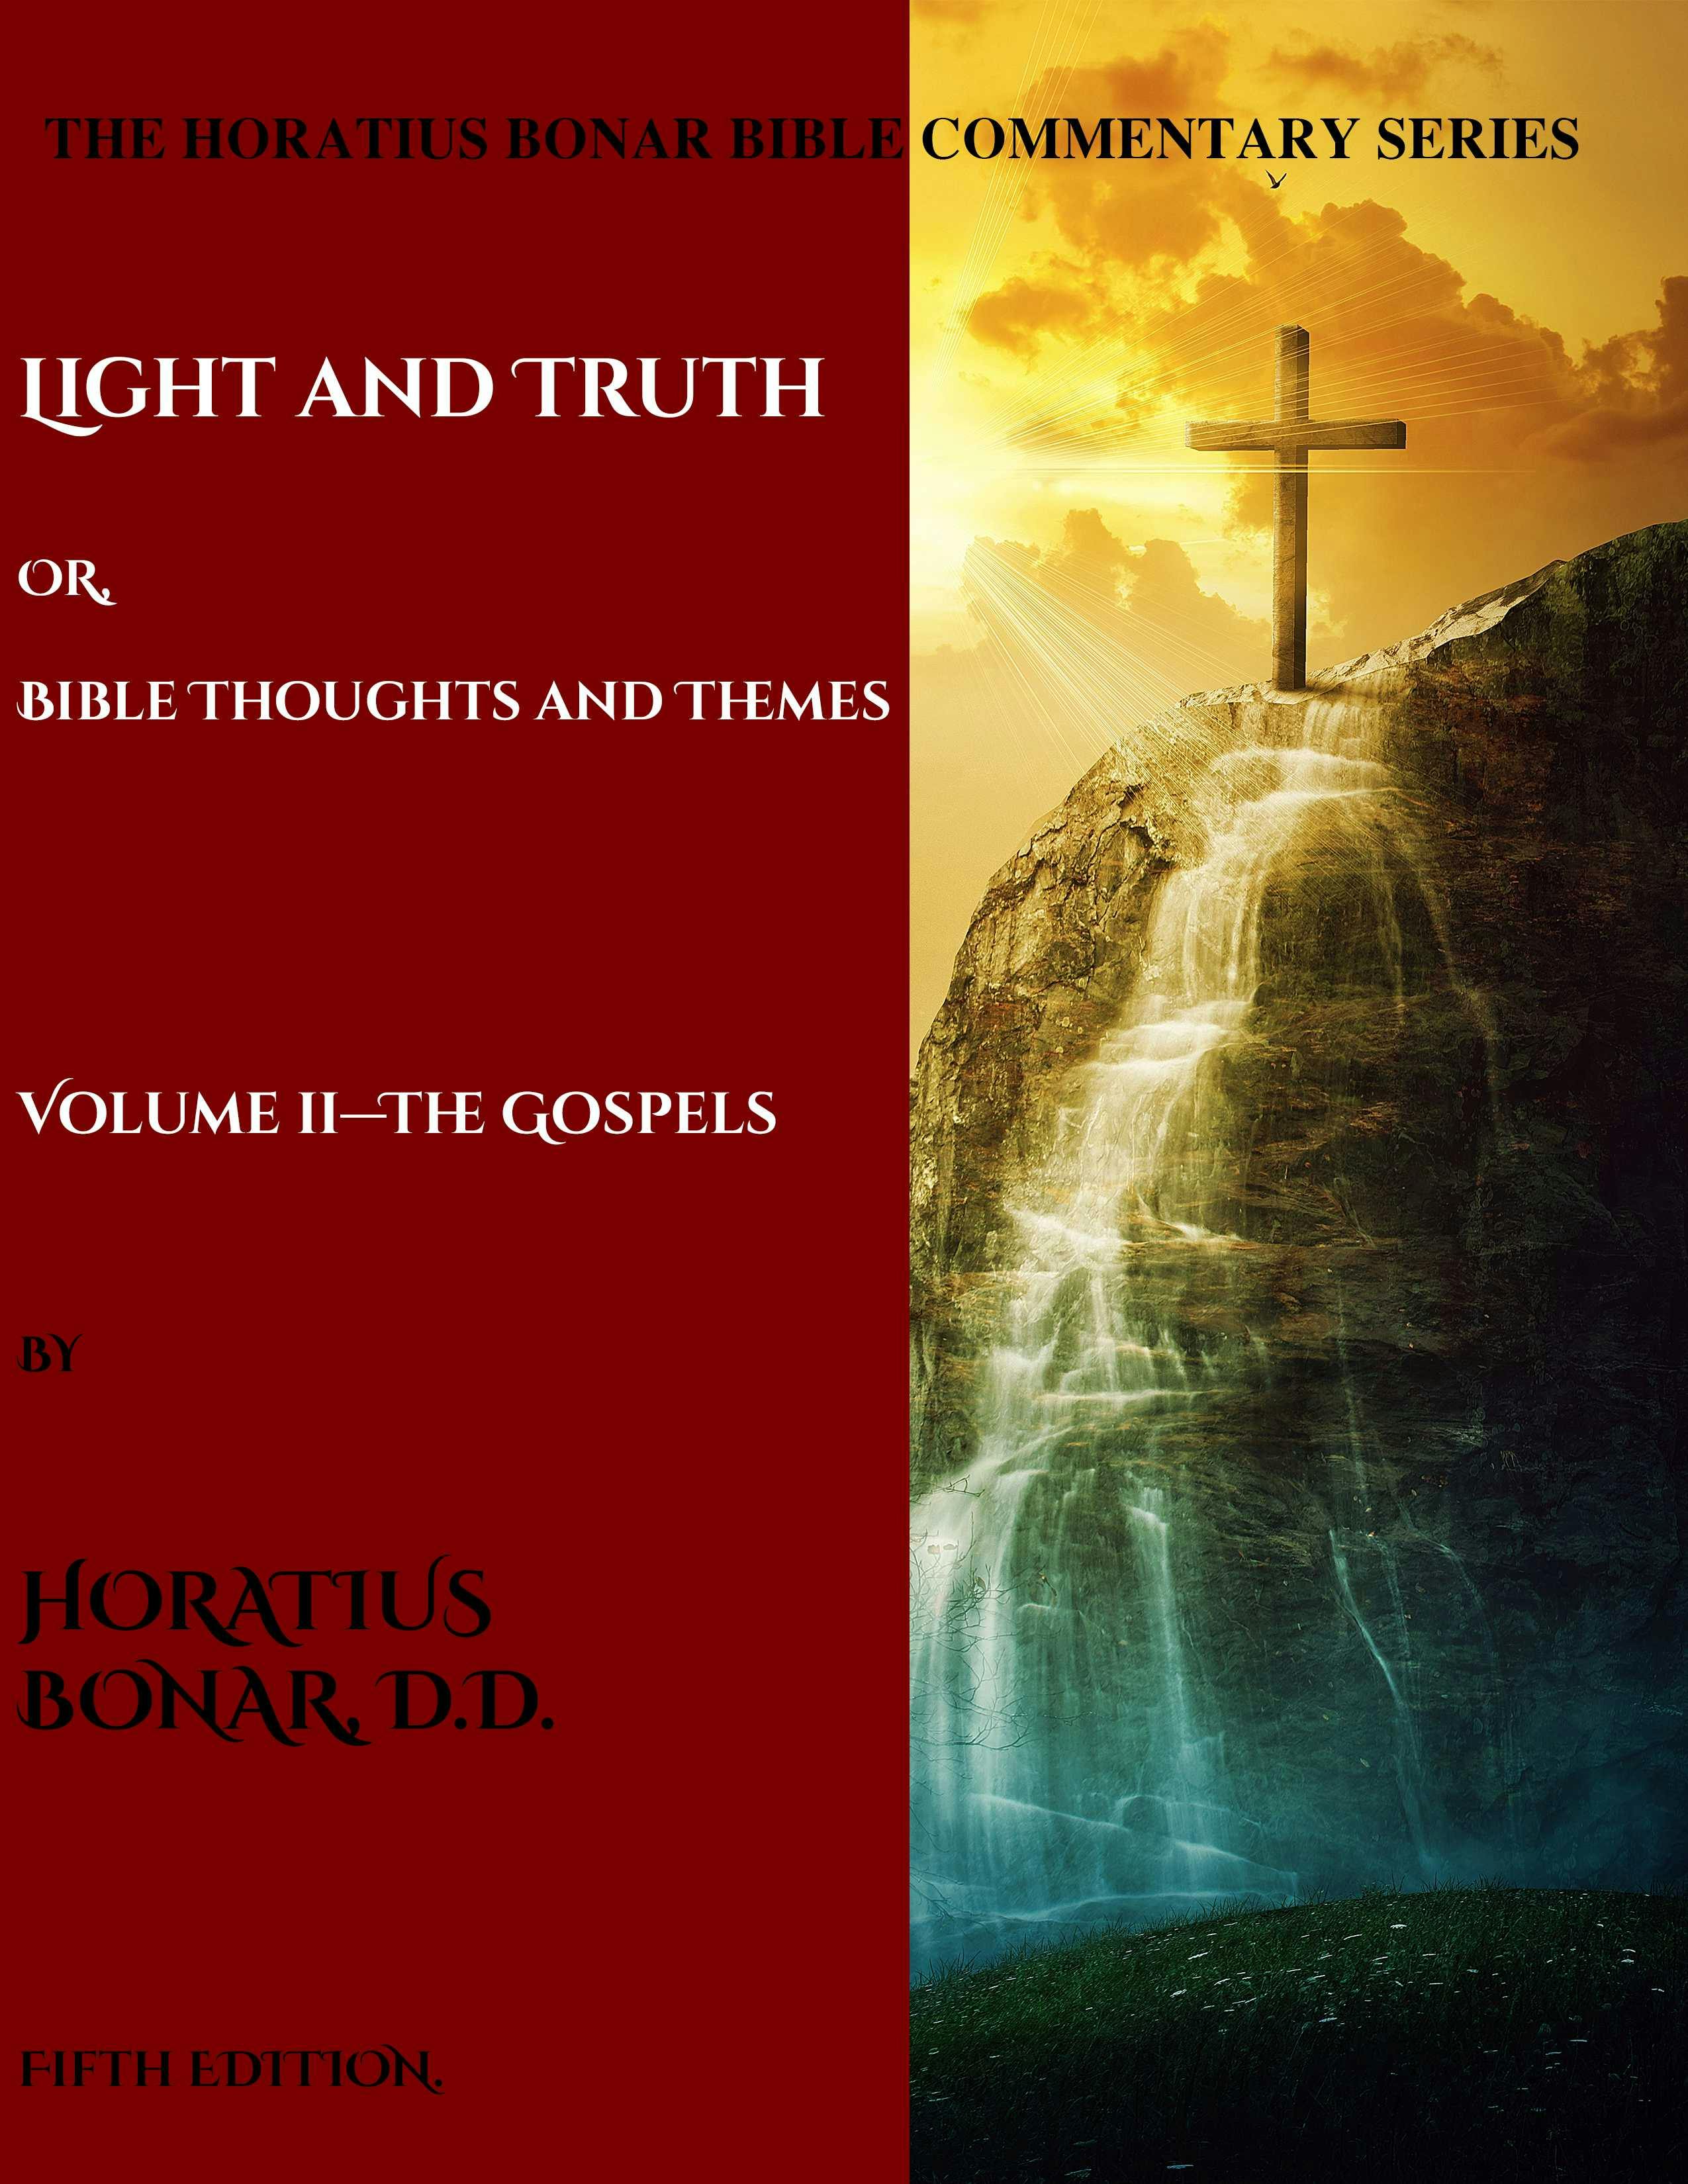 Light and Truth or Gospel Thoughts and Themes: Volume II: Gospels - Horatius Bonar